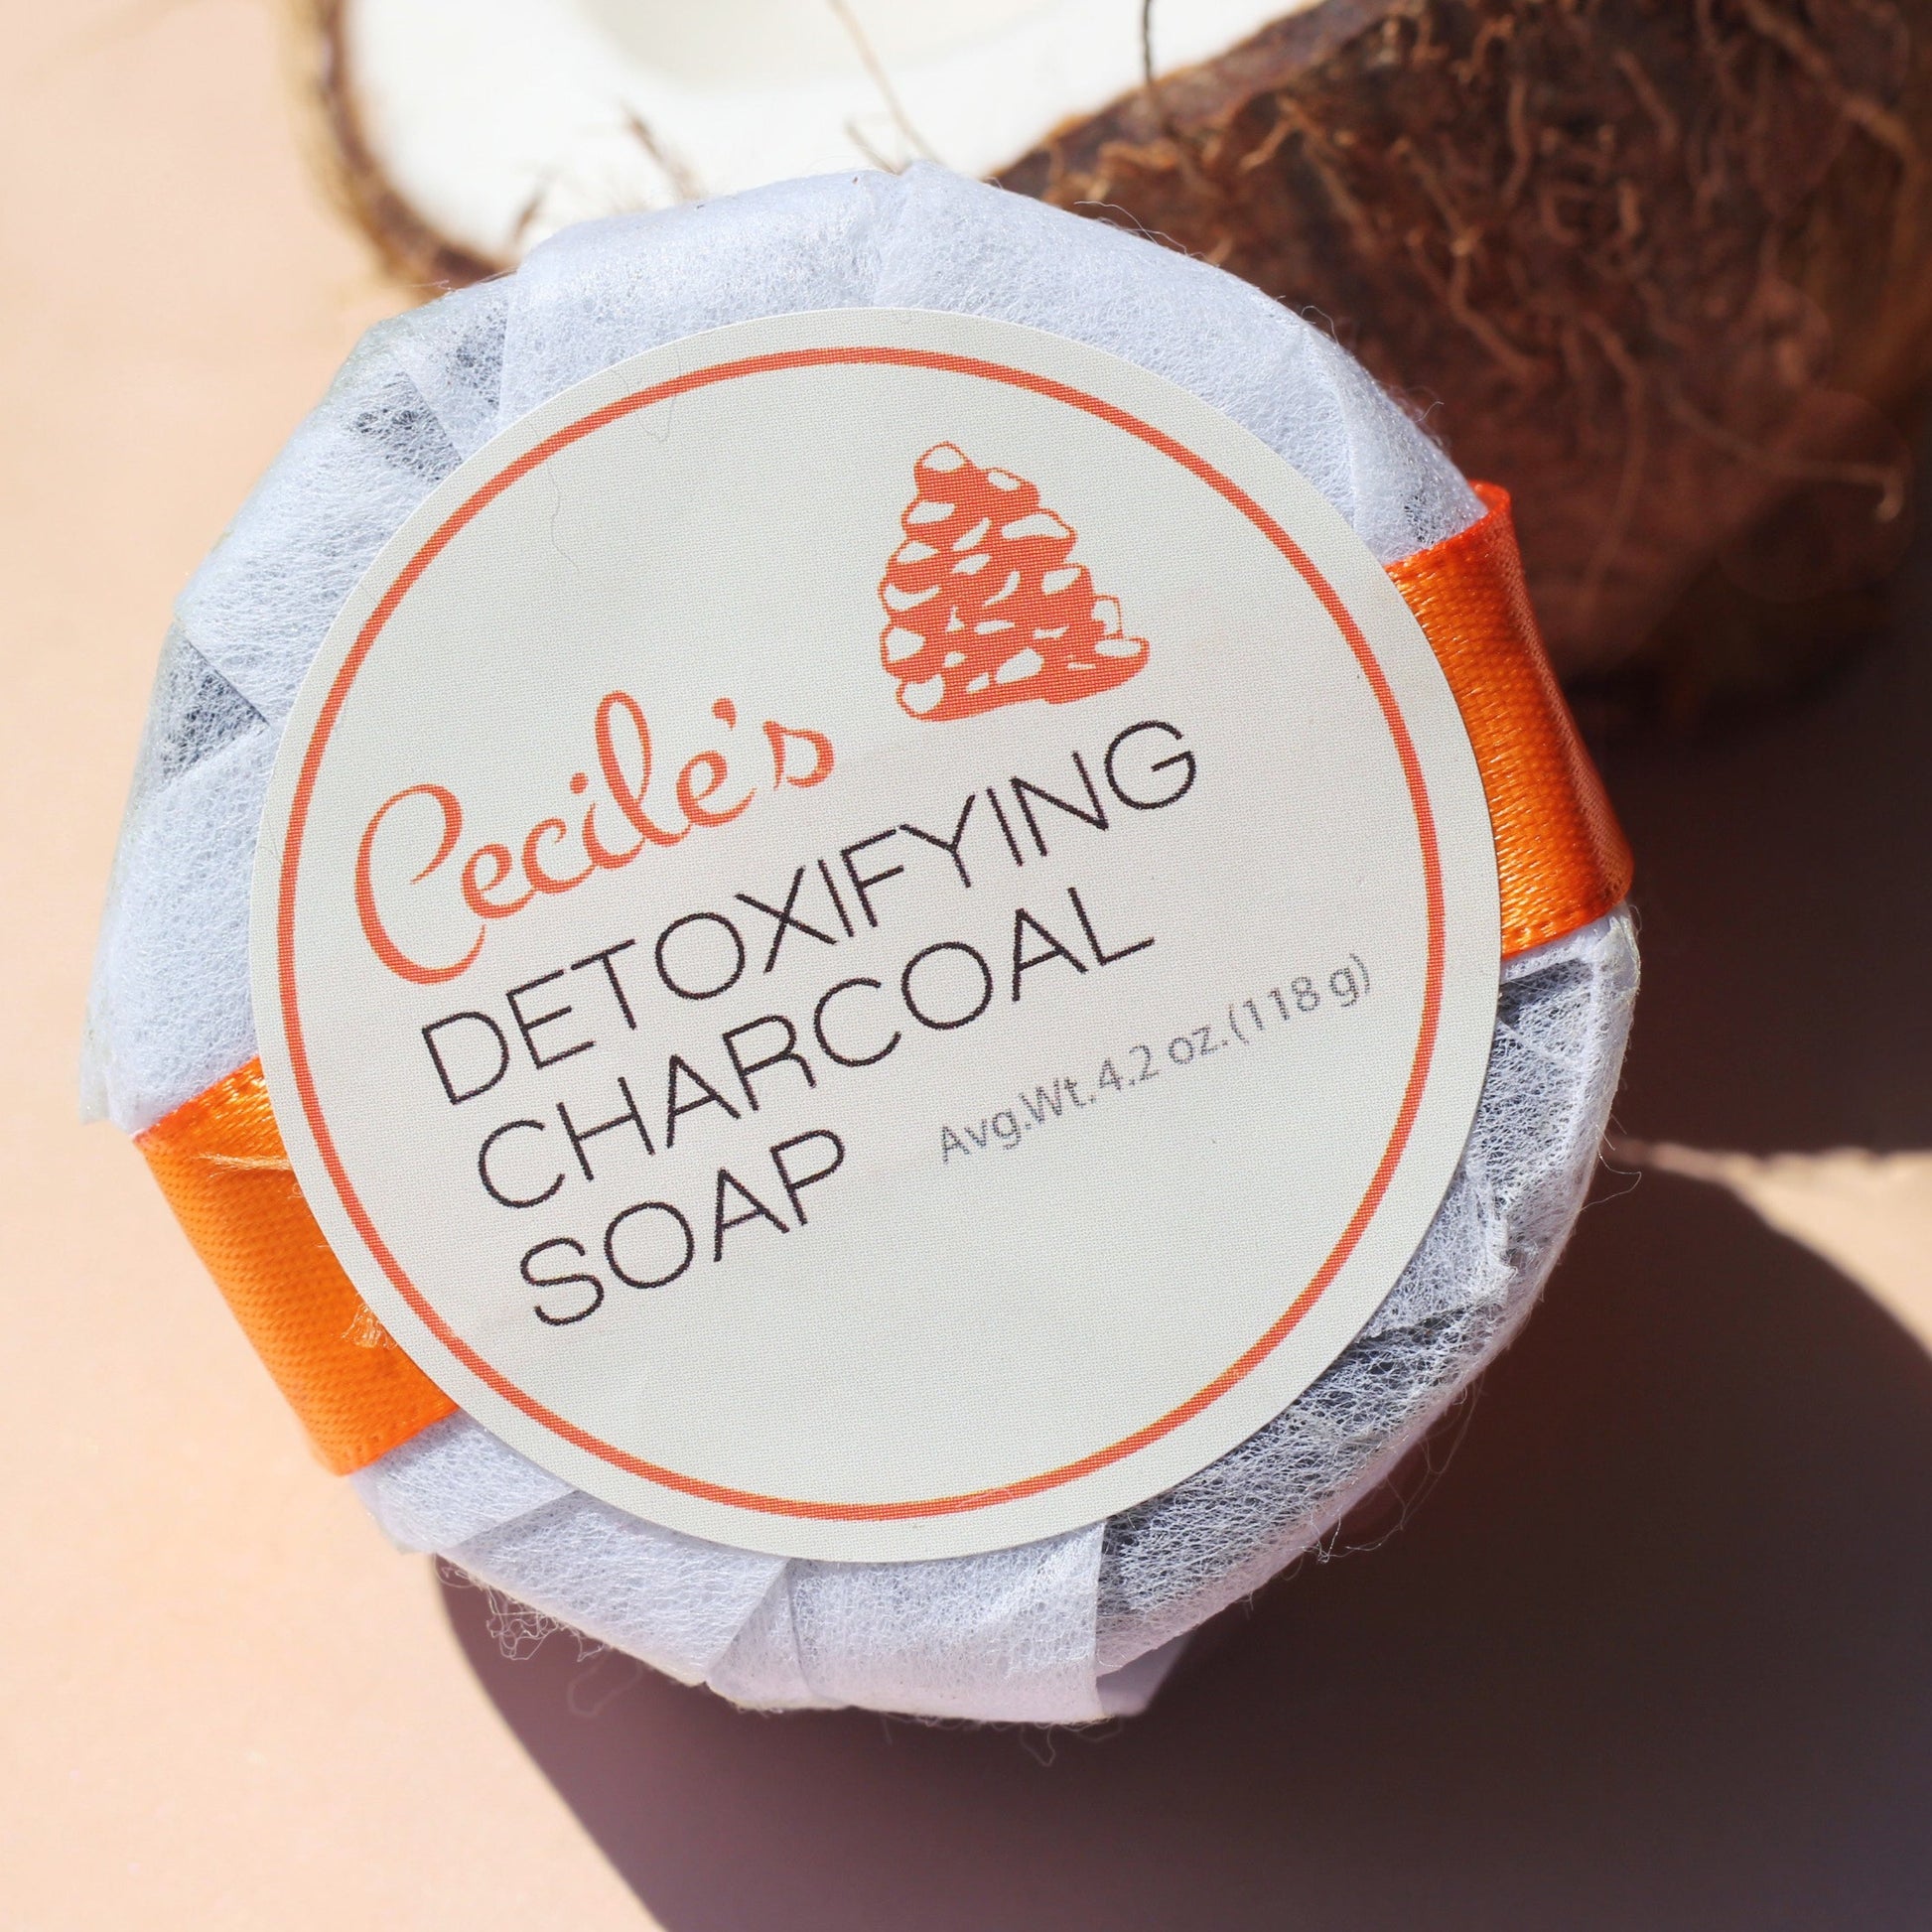 Cecile's Bath & Body Detoxifying charcoal soap with coconut oil